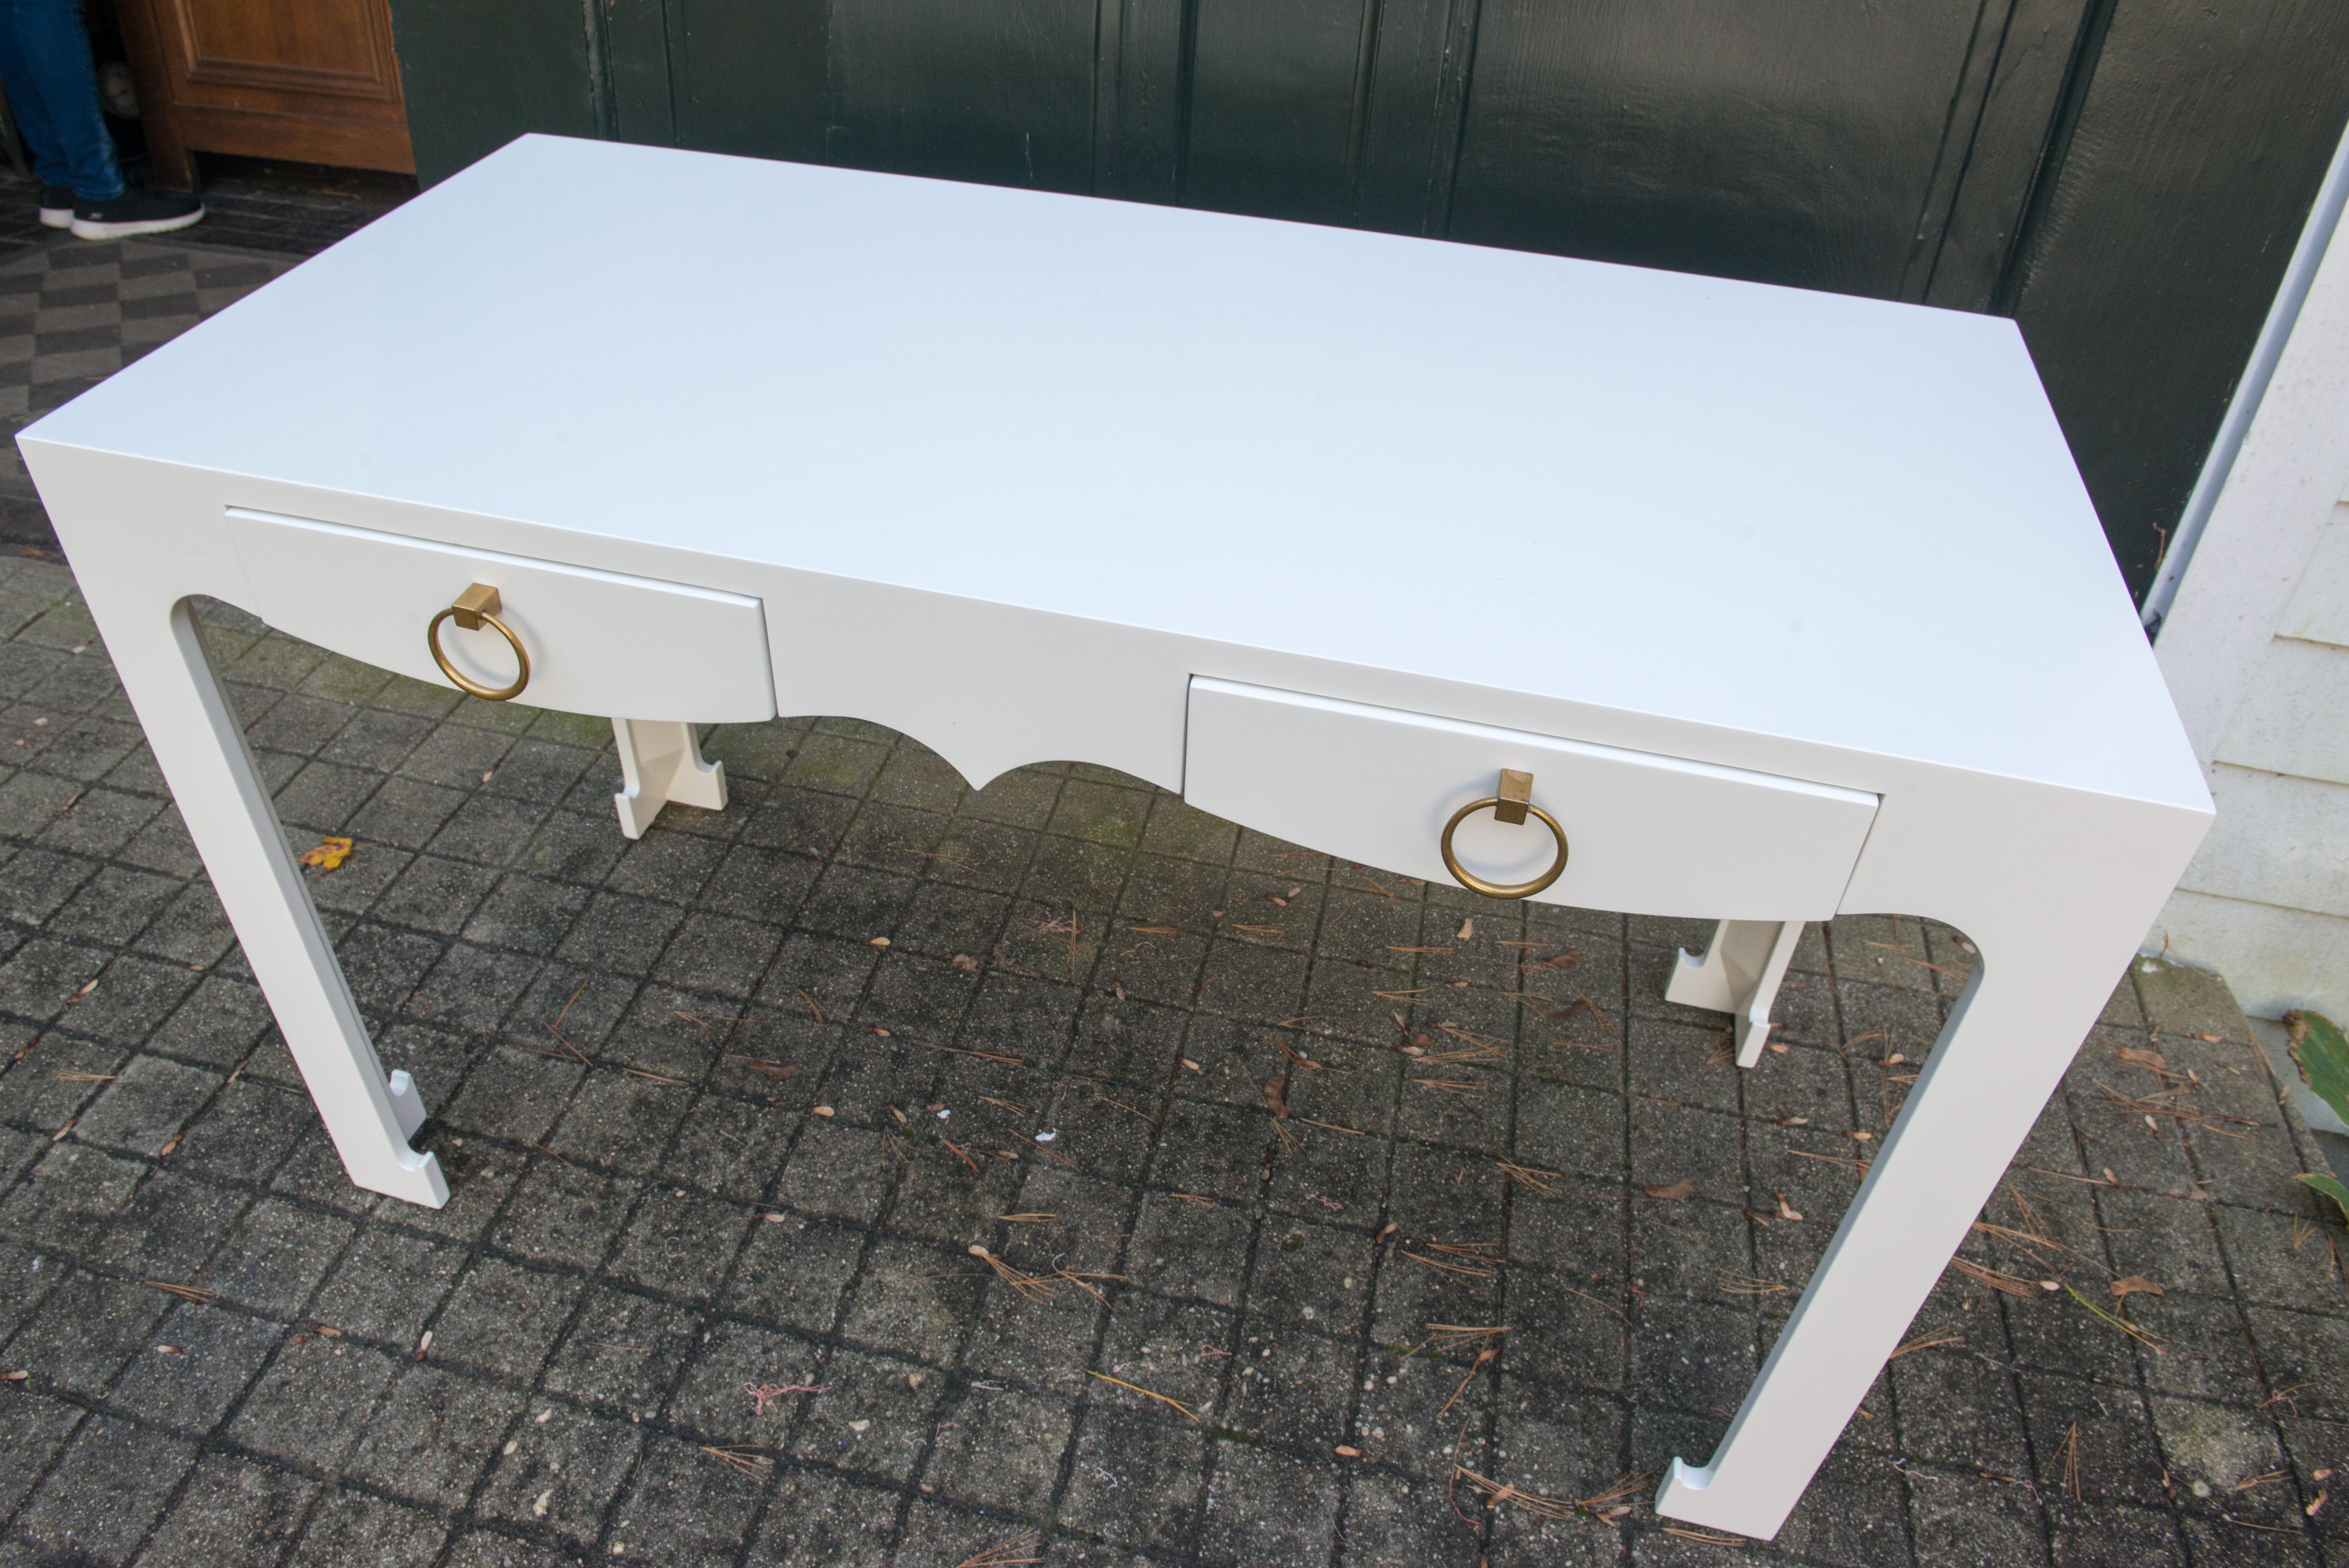 White lacquered desk, two drawers with brass ring pulls. Clearance height 23.5. Desk or console finished on all sides.